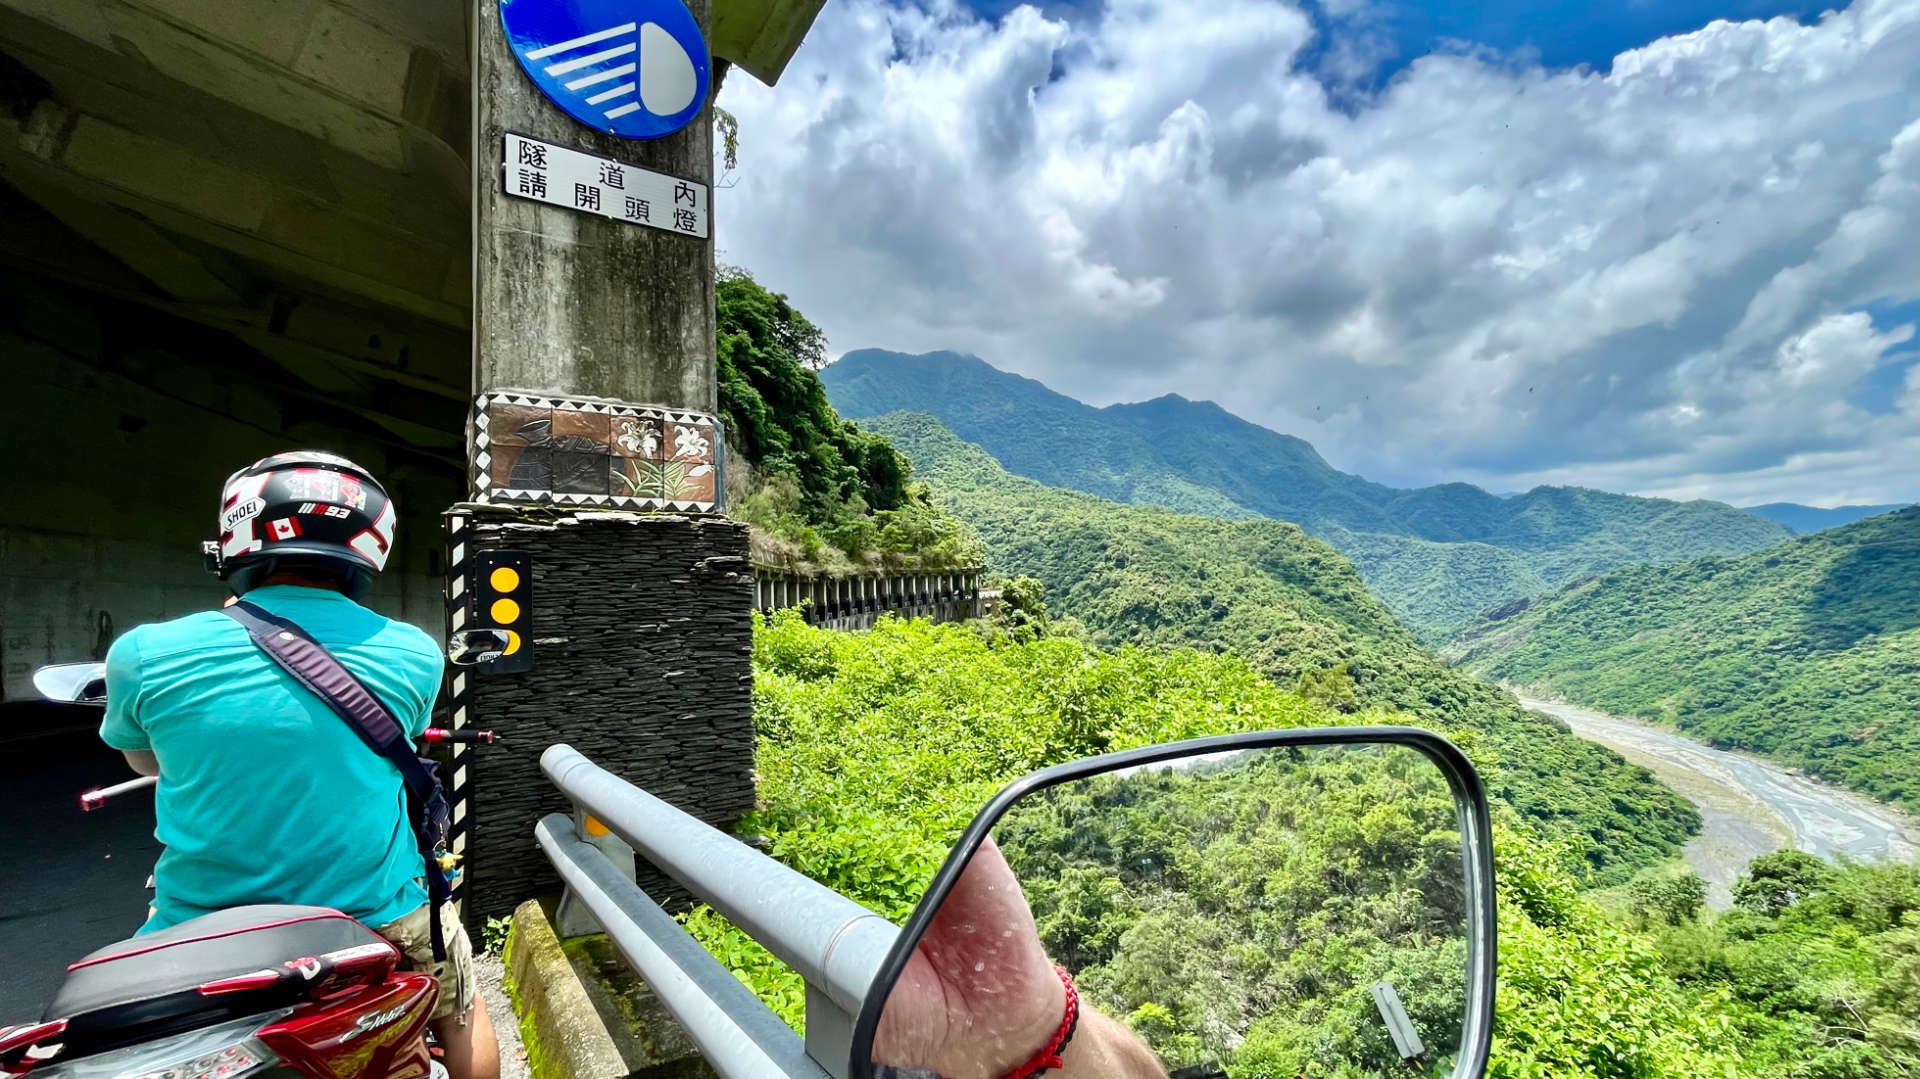 View of a river valley surrounded by forest-clad mountains. The photo is taken at the entrance to a tunnel, which is adorned with ceramic tile art depicting flowers and a clay pot.